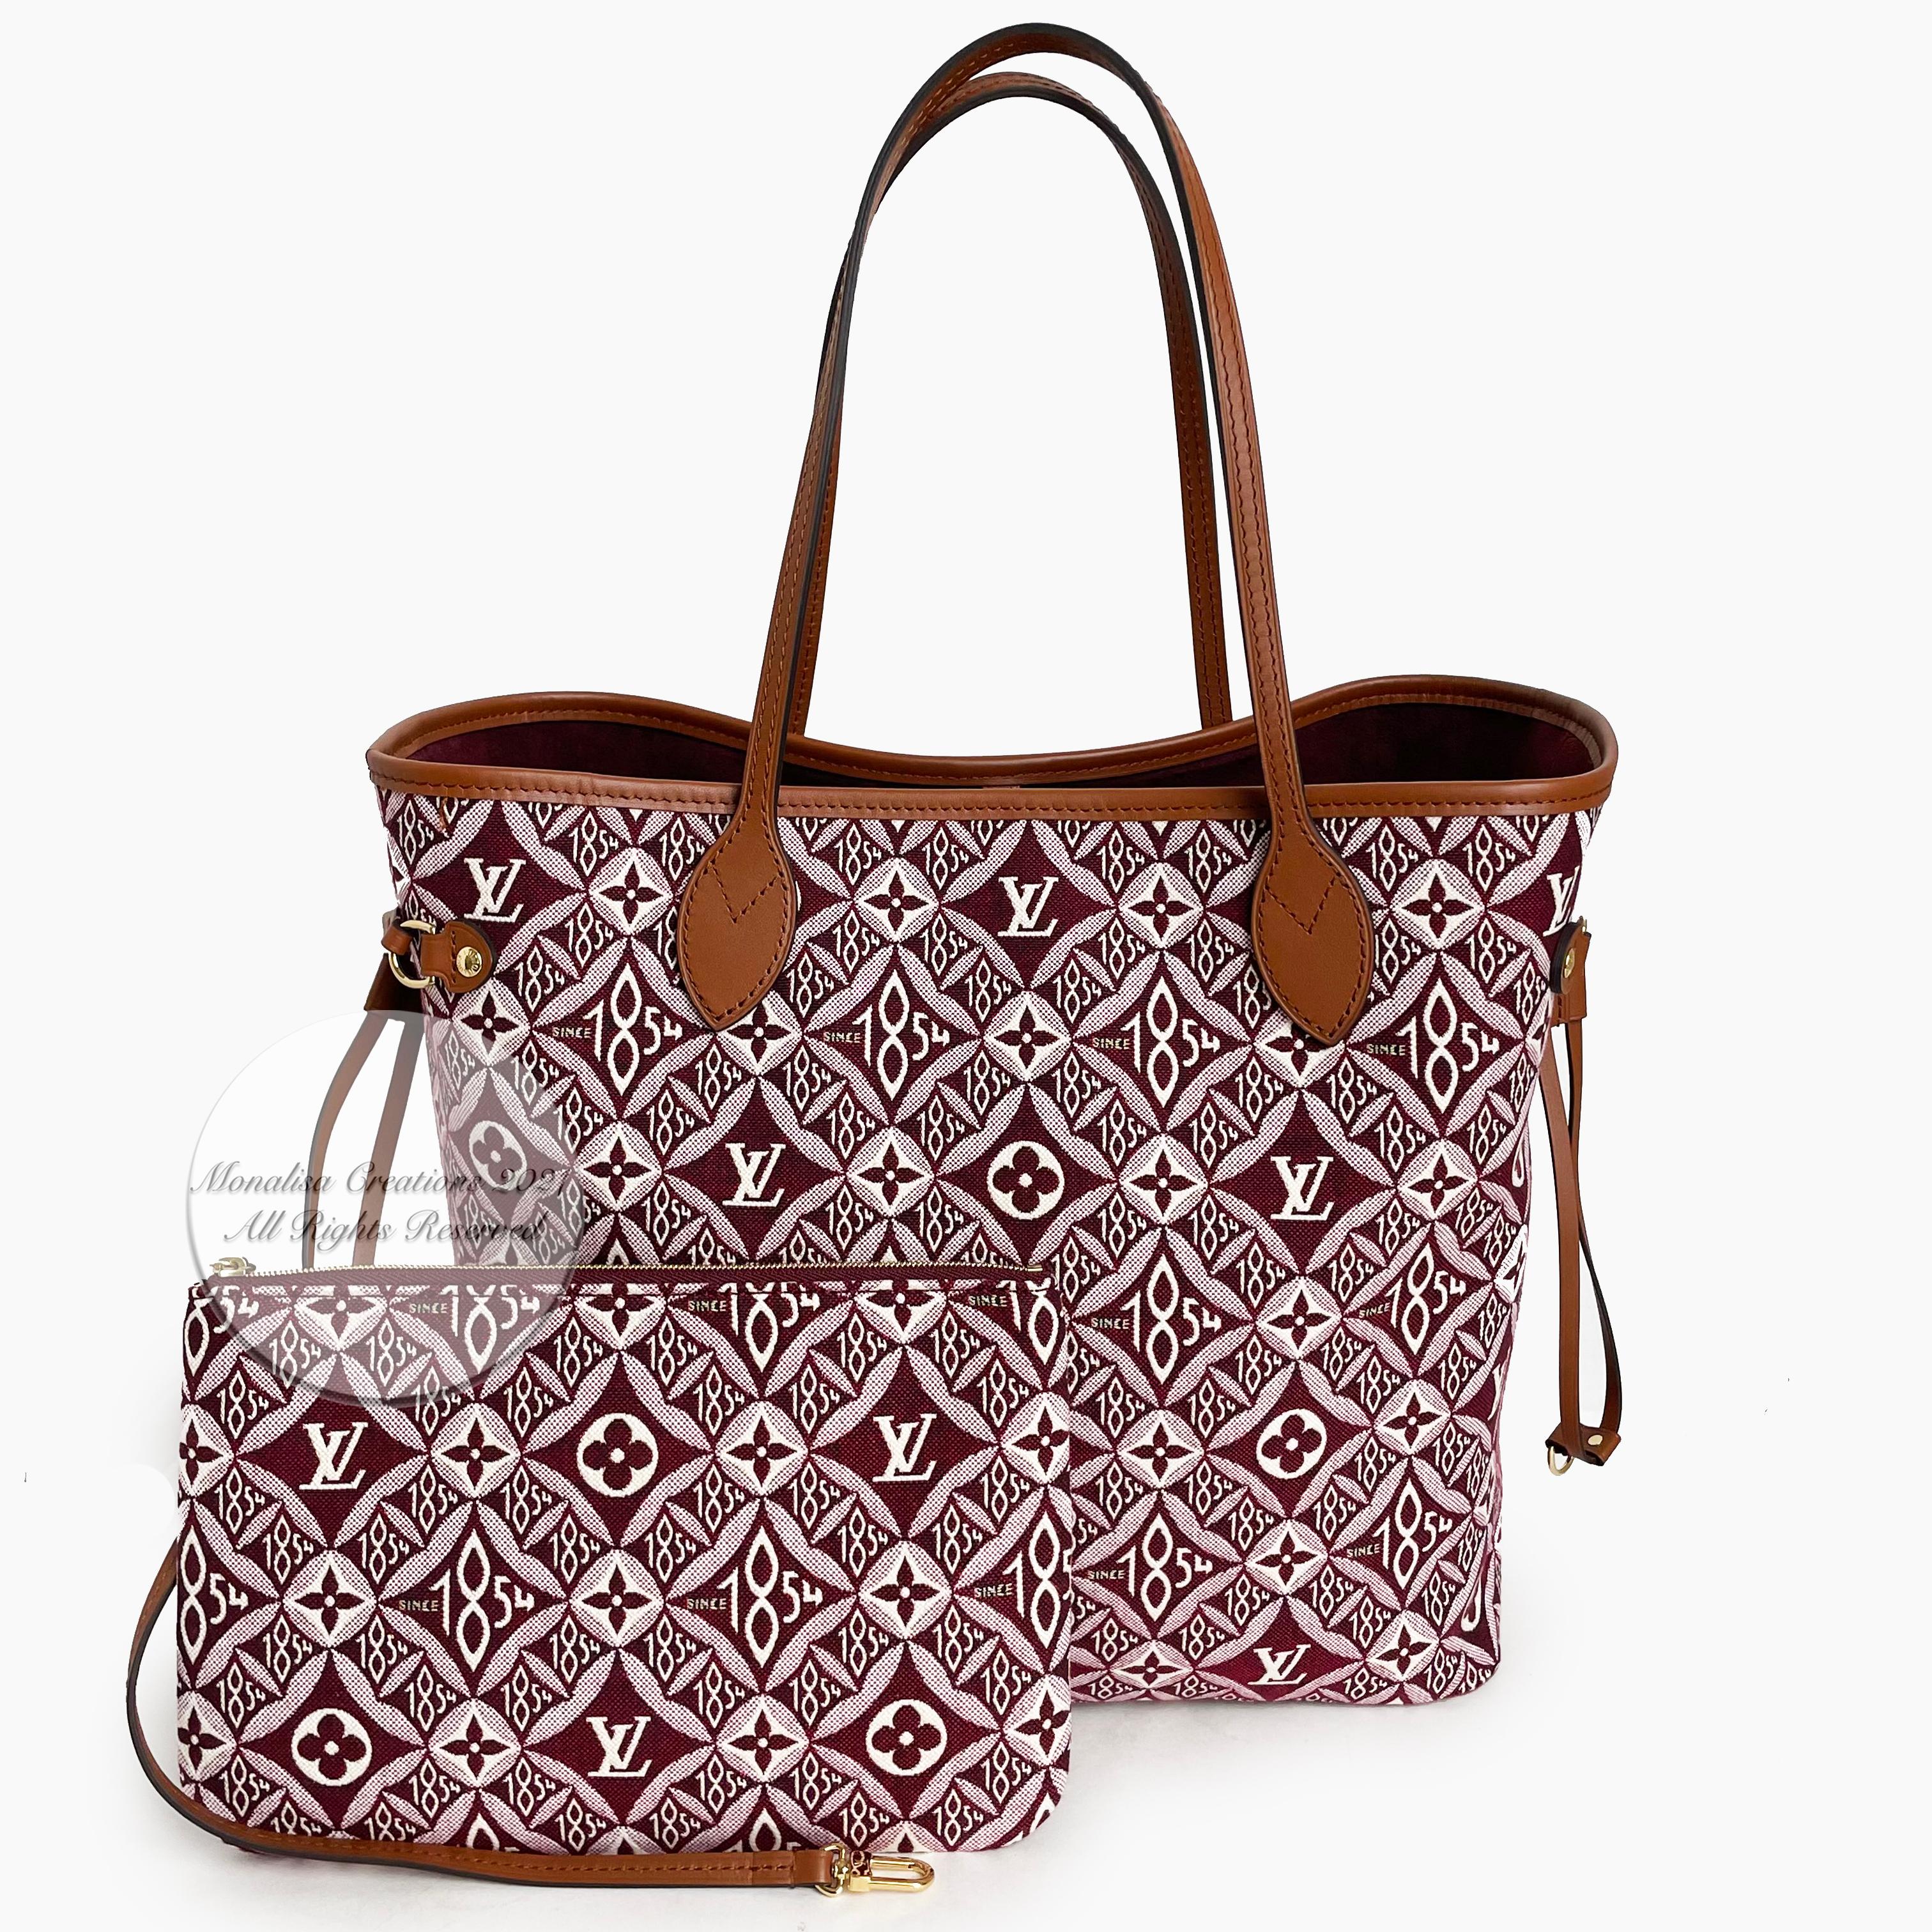 Louis Vuitton Since 1854 Neverfull Tote Bag Bordeaux + Removable Pouch in Box  1